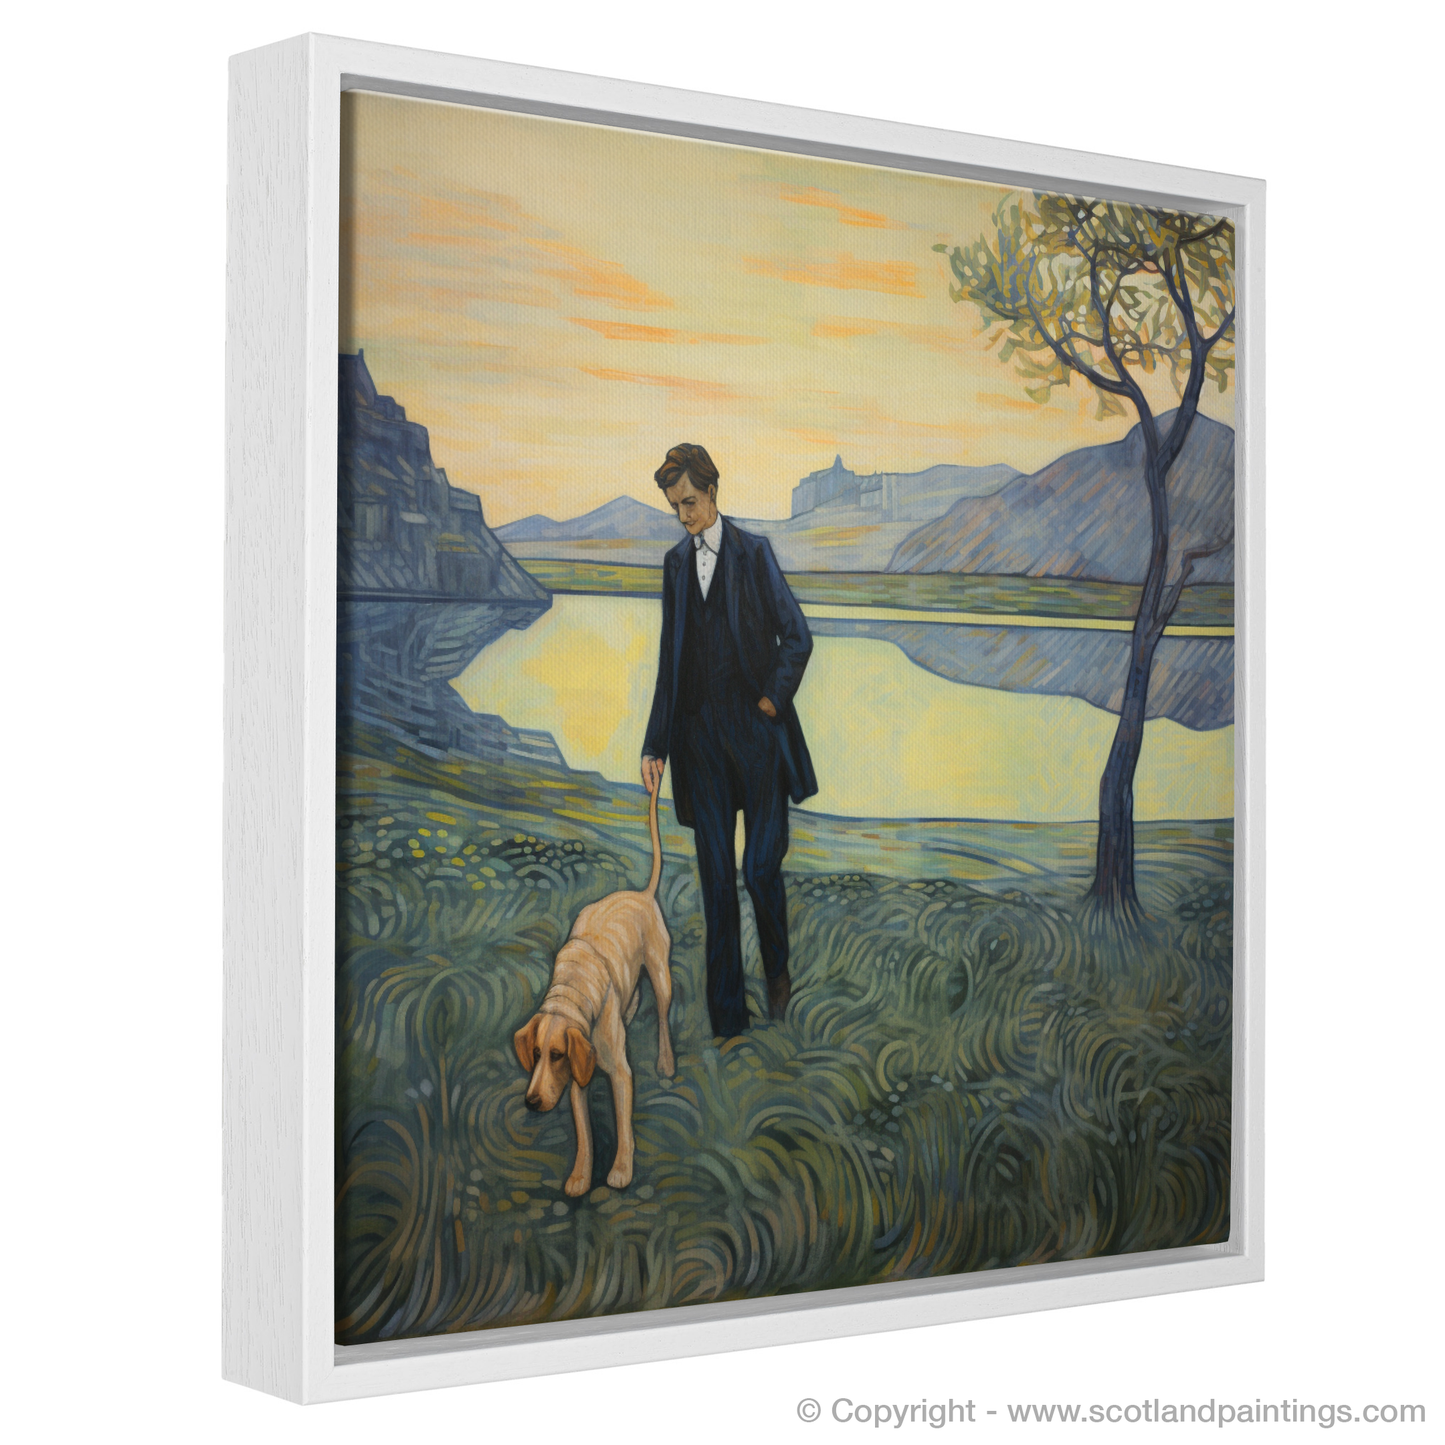 Painting and Art Print of A man walking dog at the side of Loch Lomond entitled "Twilight Promenade by Loch Lomond".